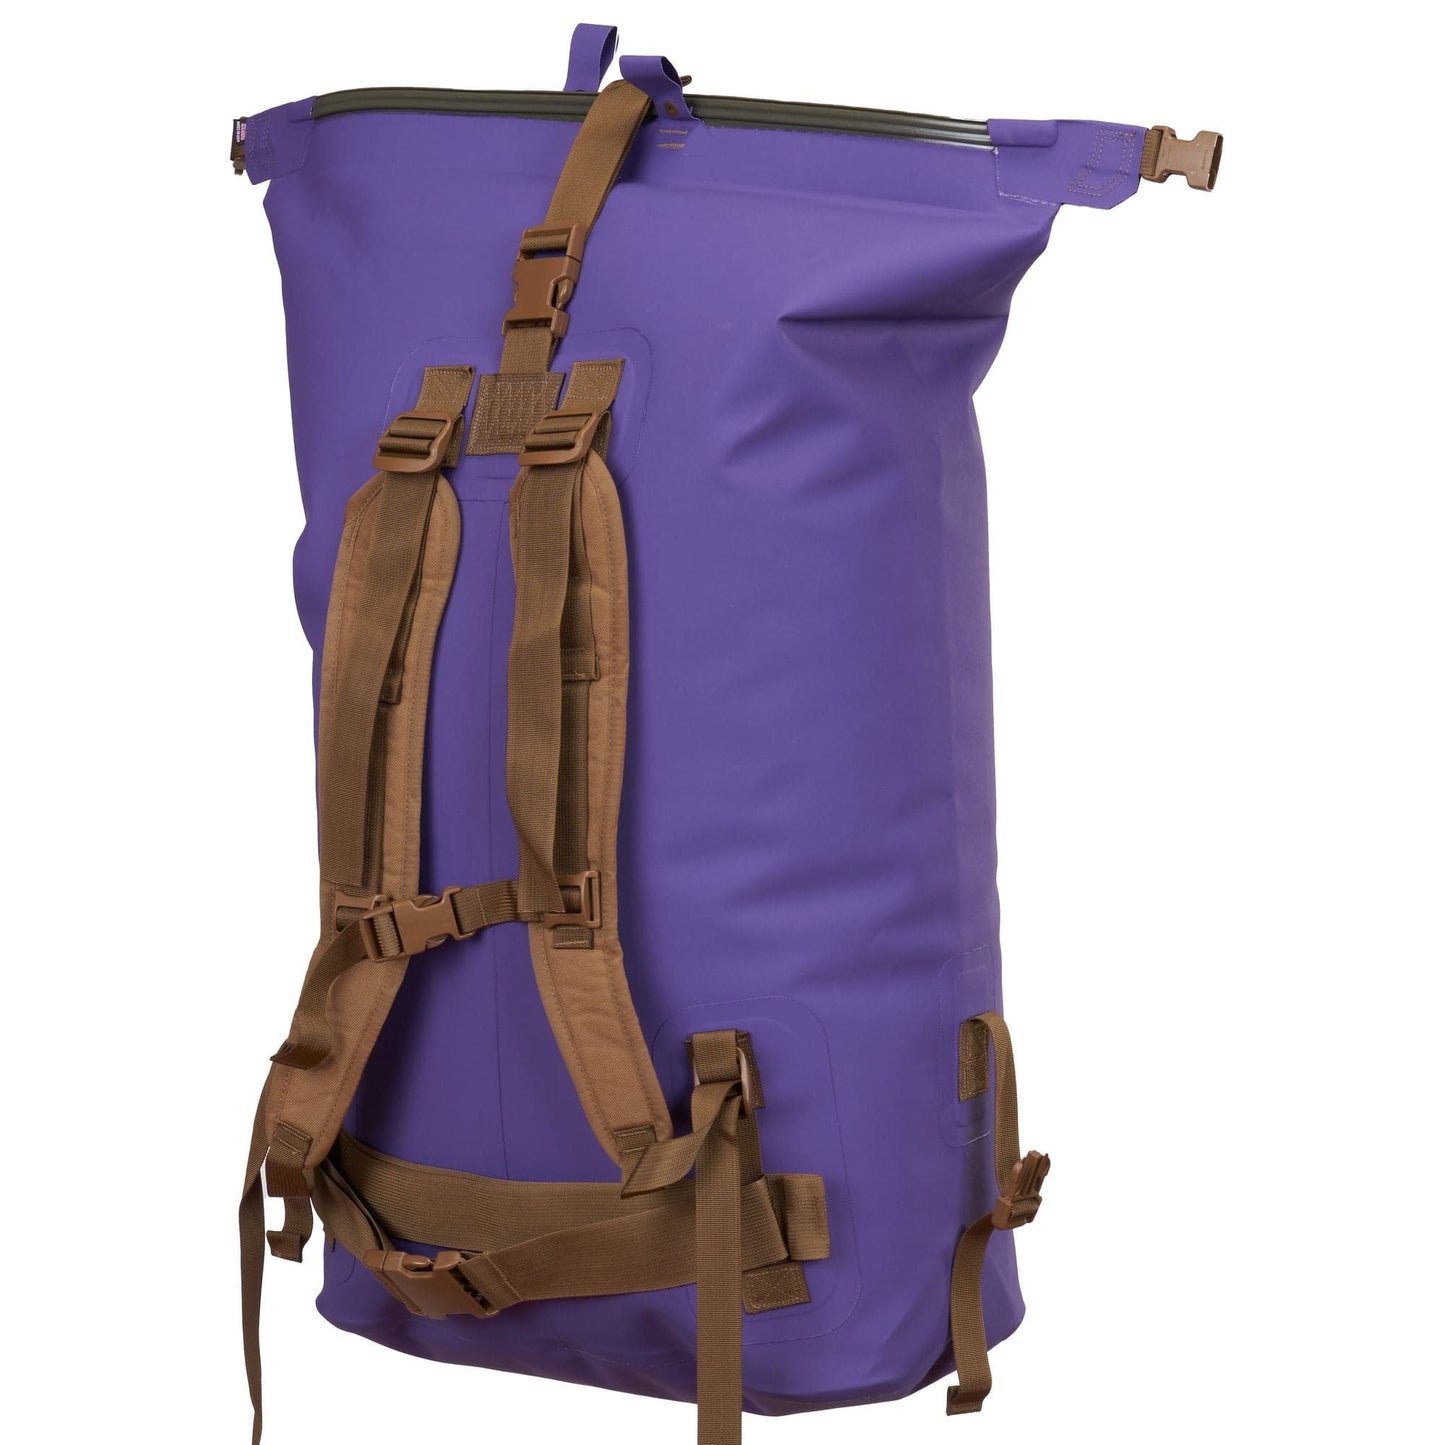 Featuring the Westwater Drypack dry bag manufactured by Watershed shown here from a fourth angle.